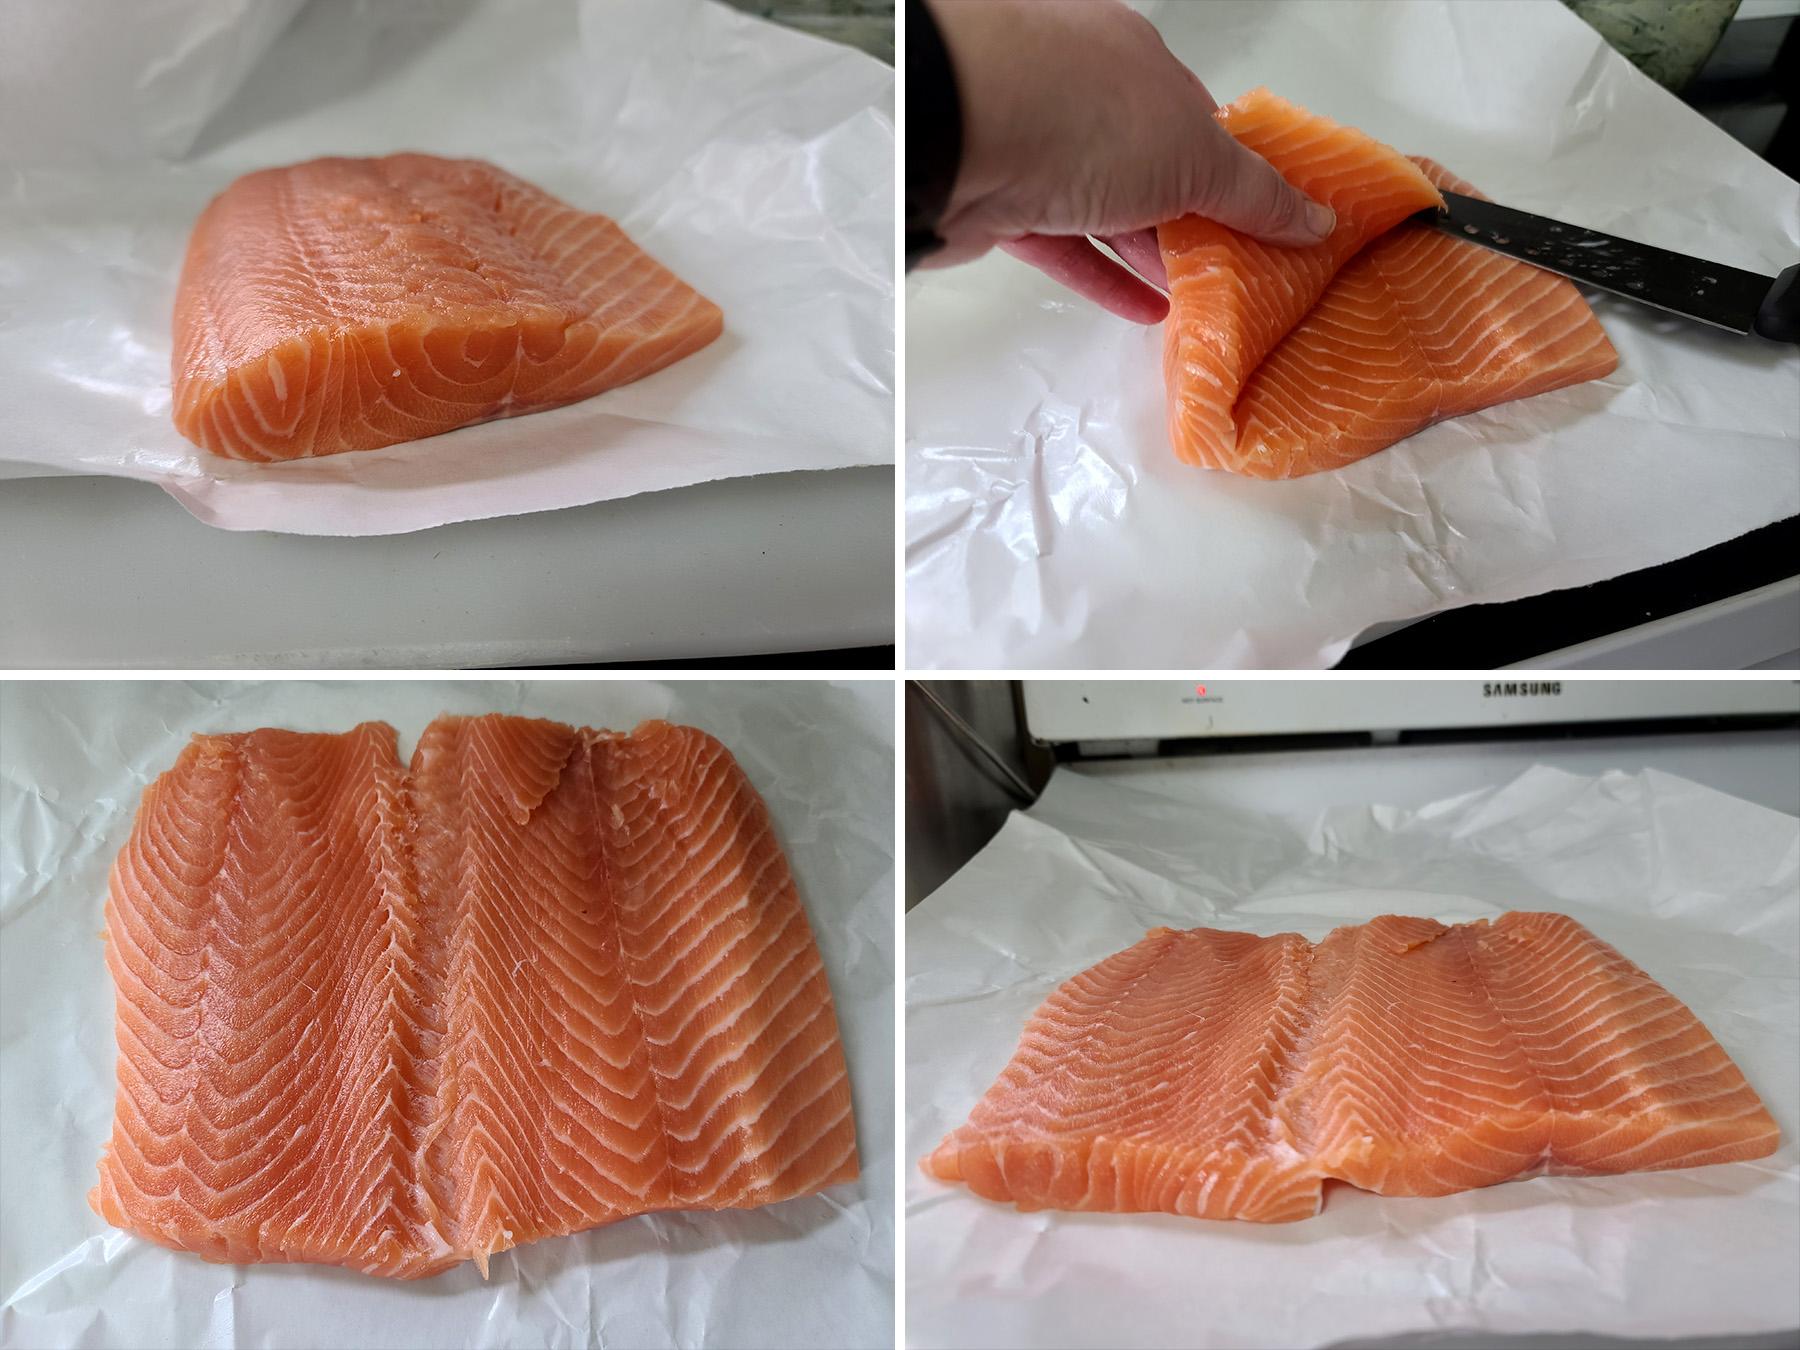 A 4 part image showing the salmon being partially butterflied, as described in the post.